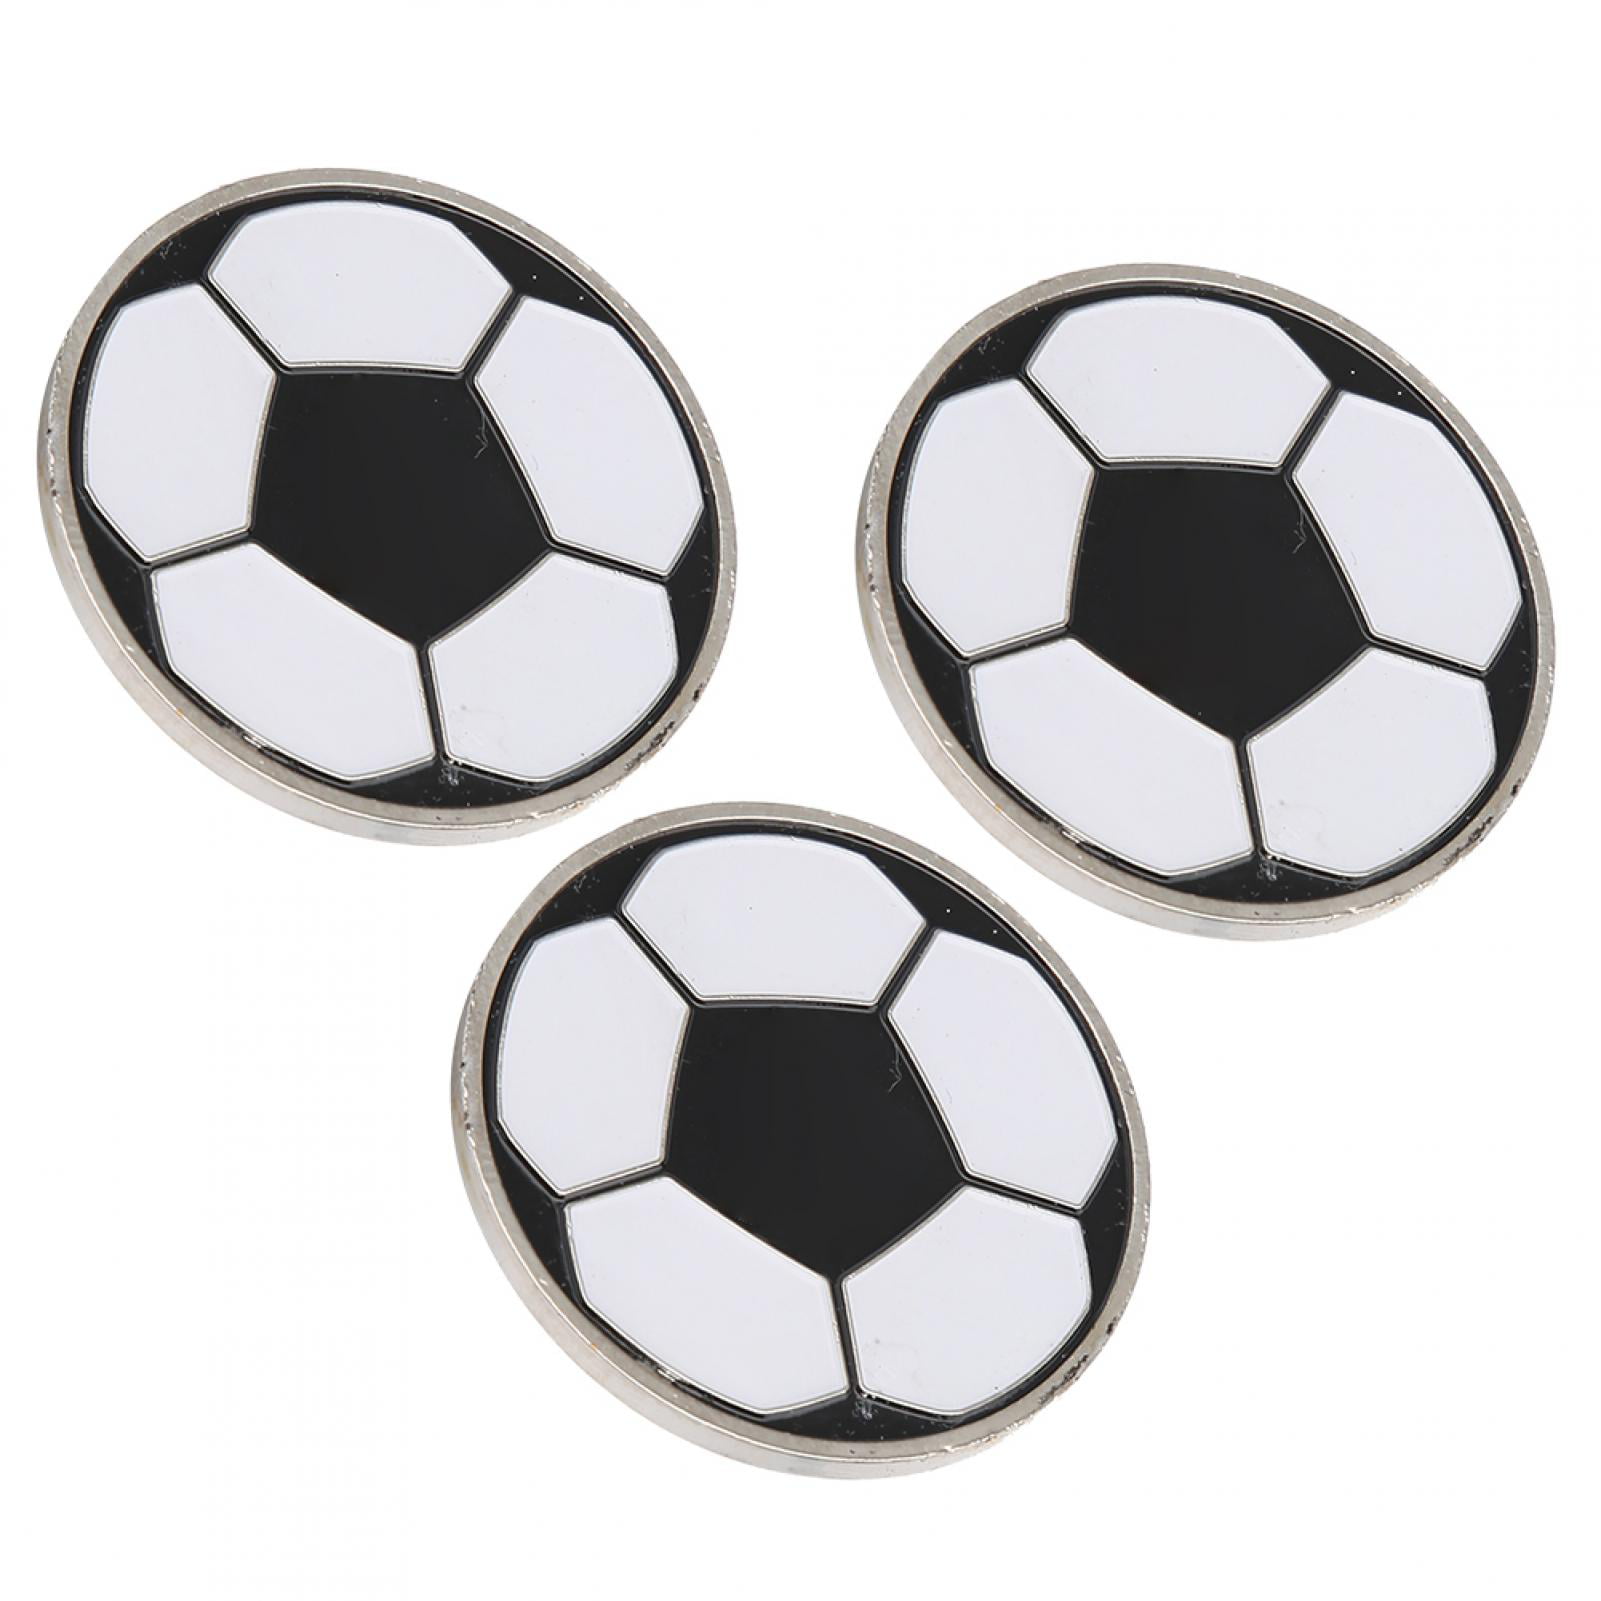 Les-Theresa 3pcs Soccer Toss Coin,Portable Football Training Match Referee Flip Coin Soccer Pick Side Toss Coin Tool